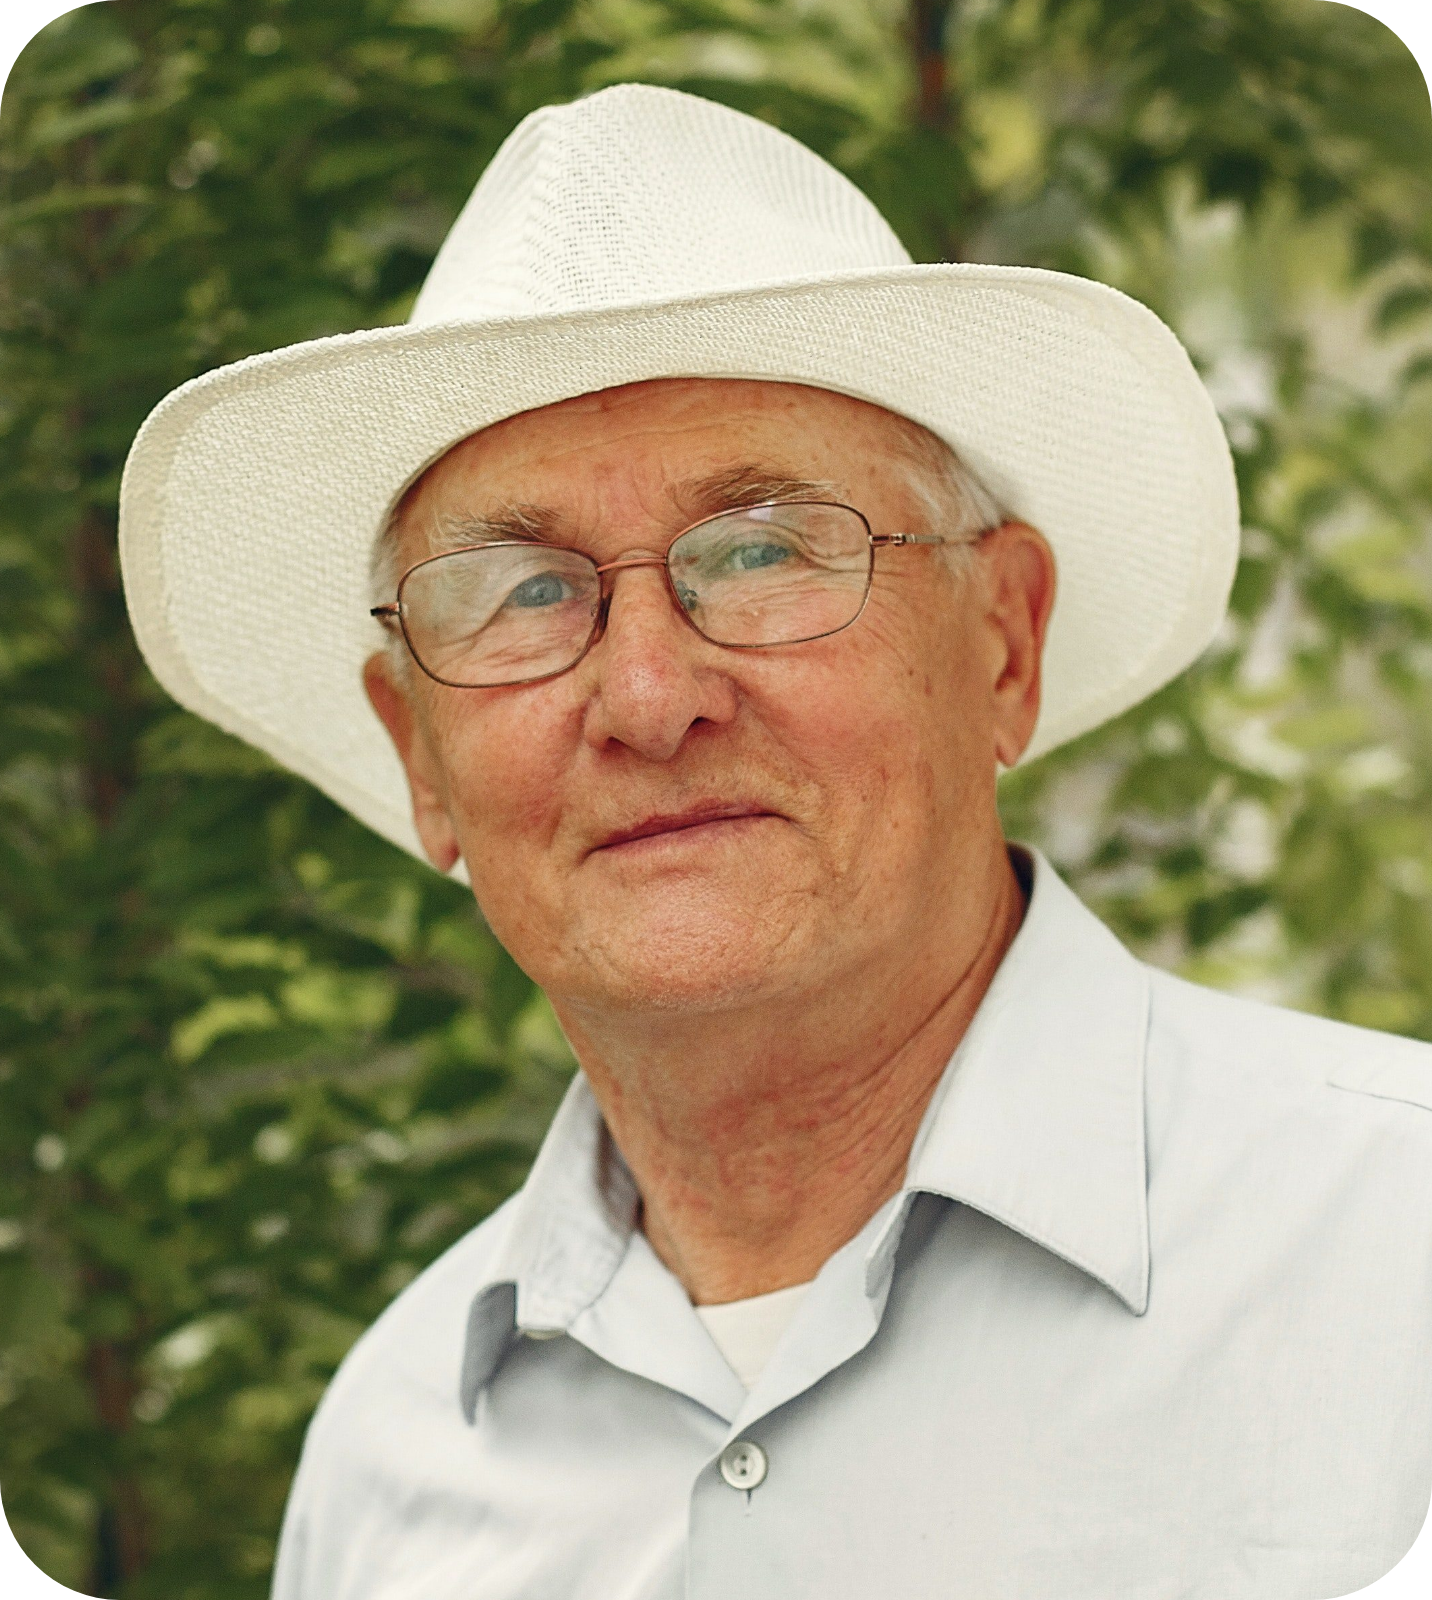 A picture of a senior man with a slightly smiling face, wearing a white hat and eyeglasses.